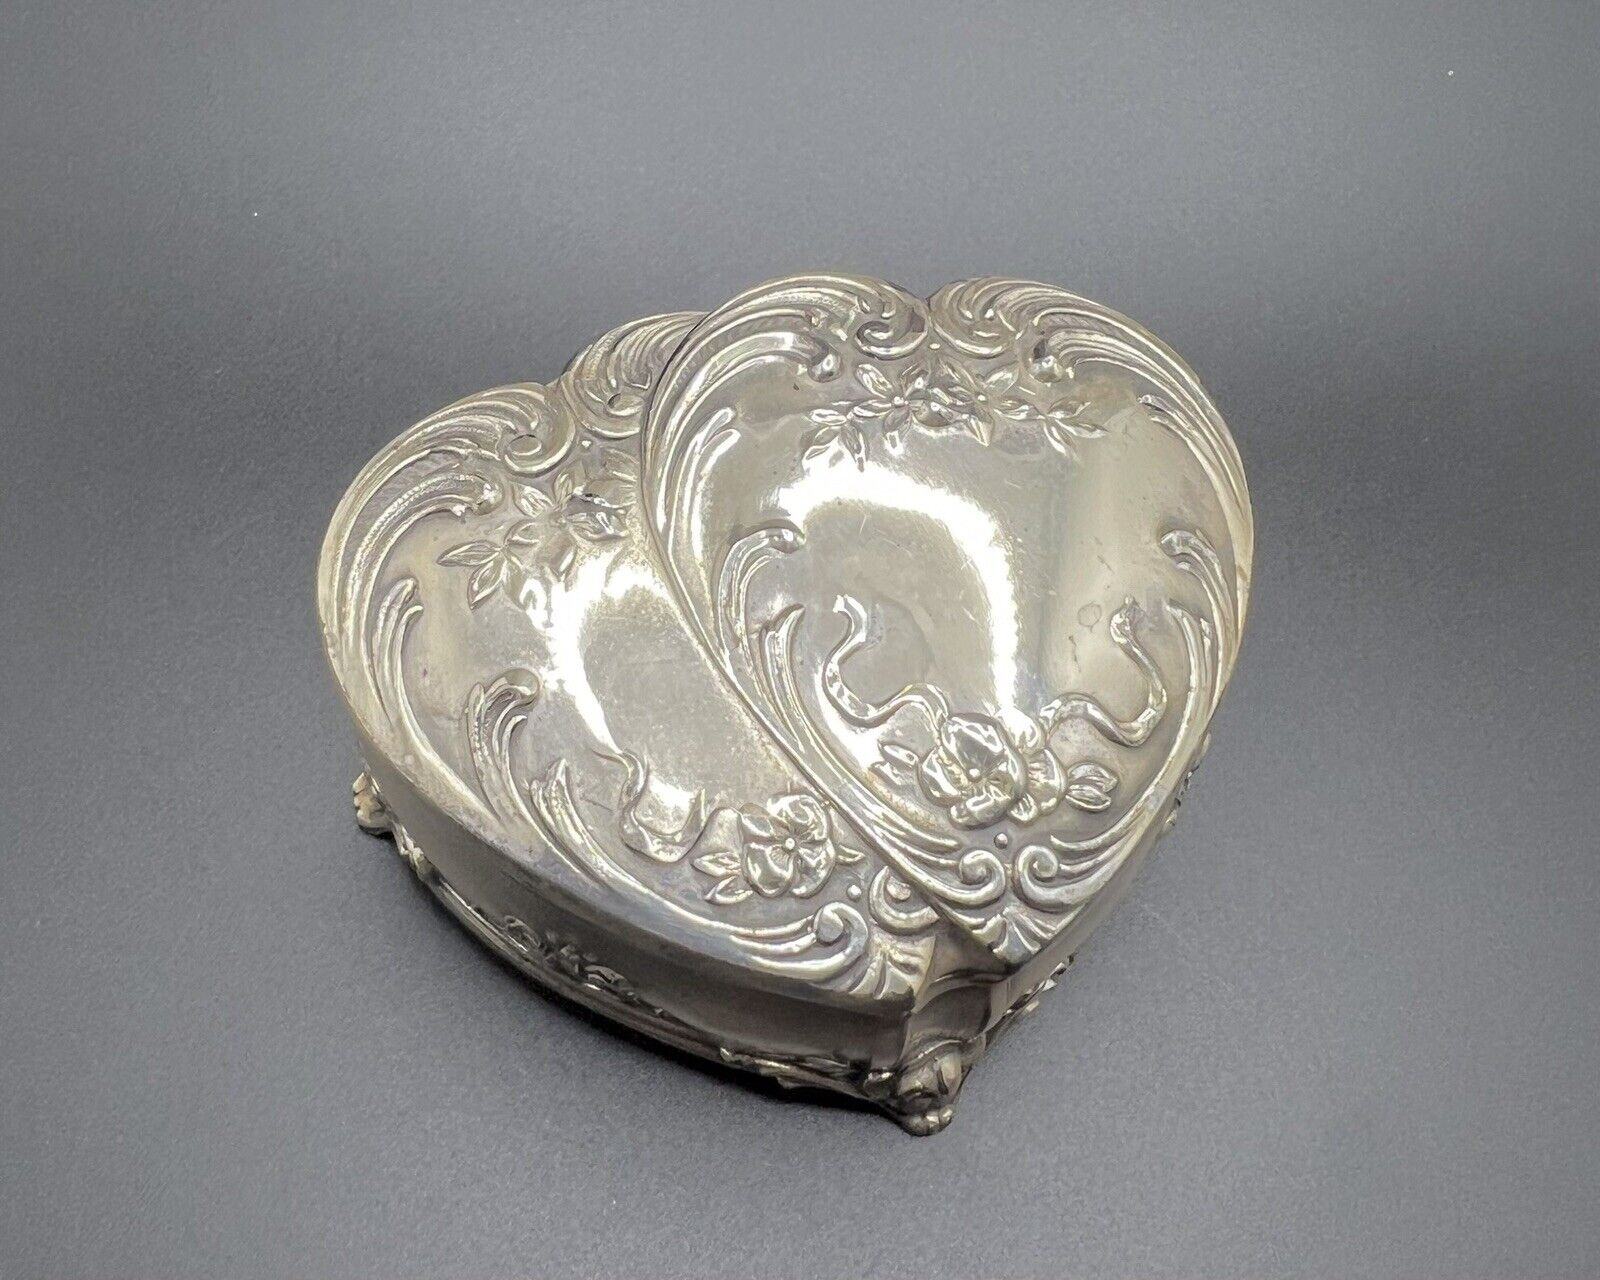 Vintage Double Heart Design Silver Plate Trinket / Jewelry Box Signed 518 WED